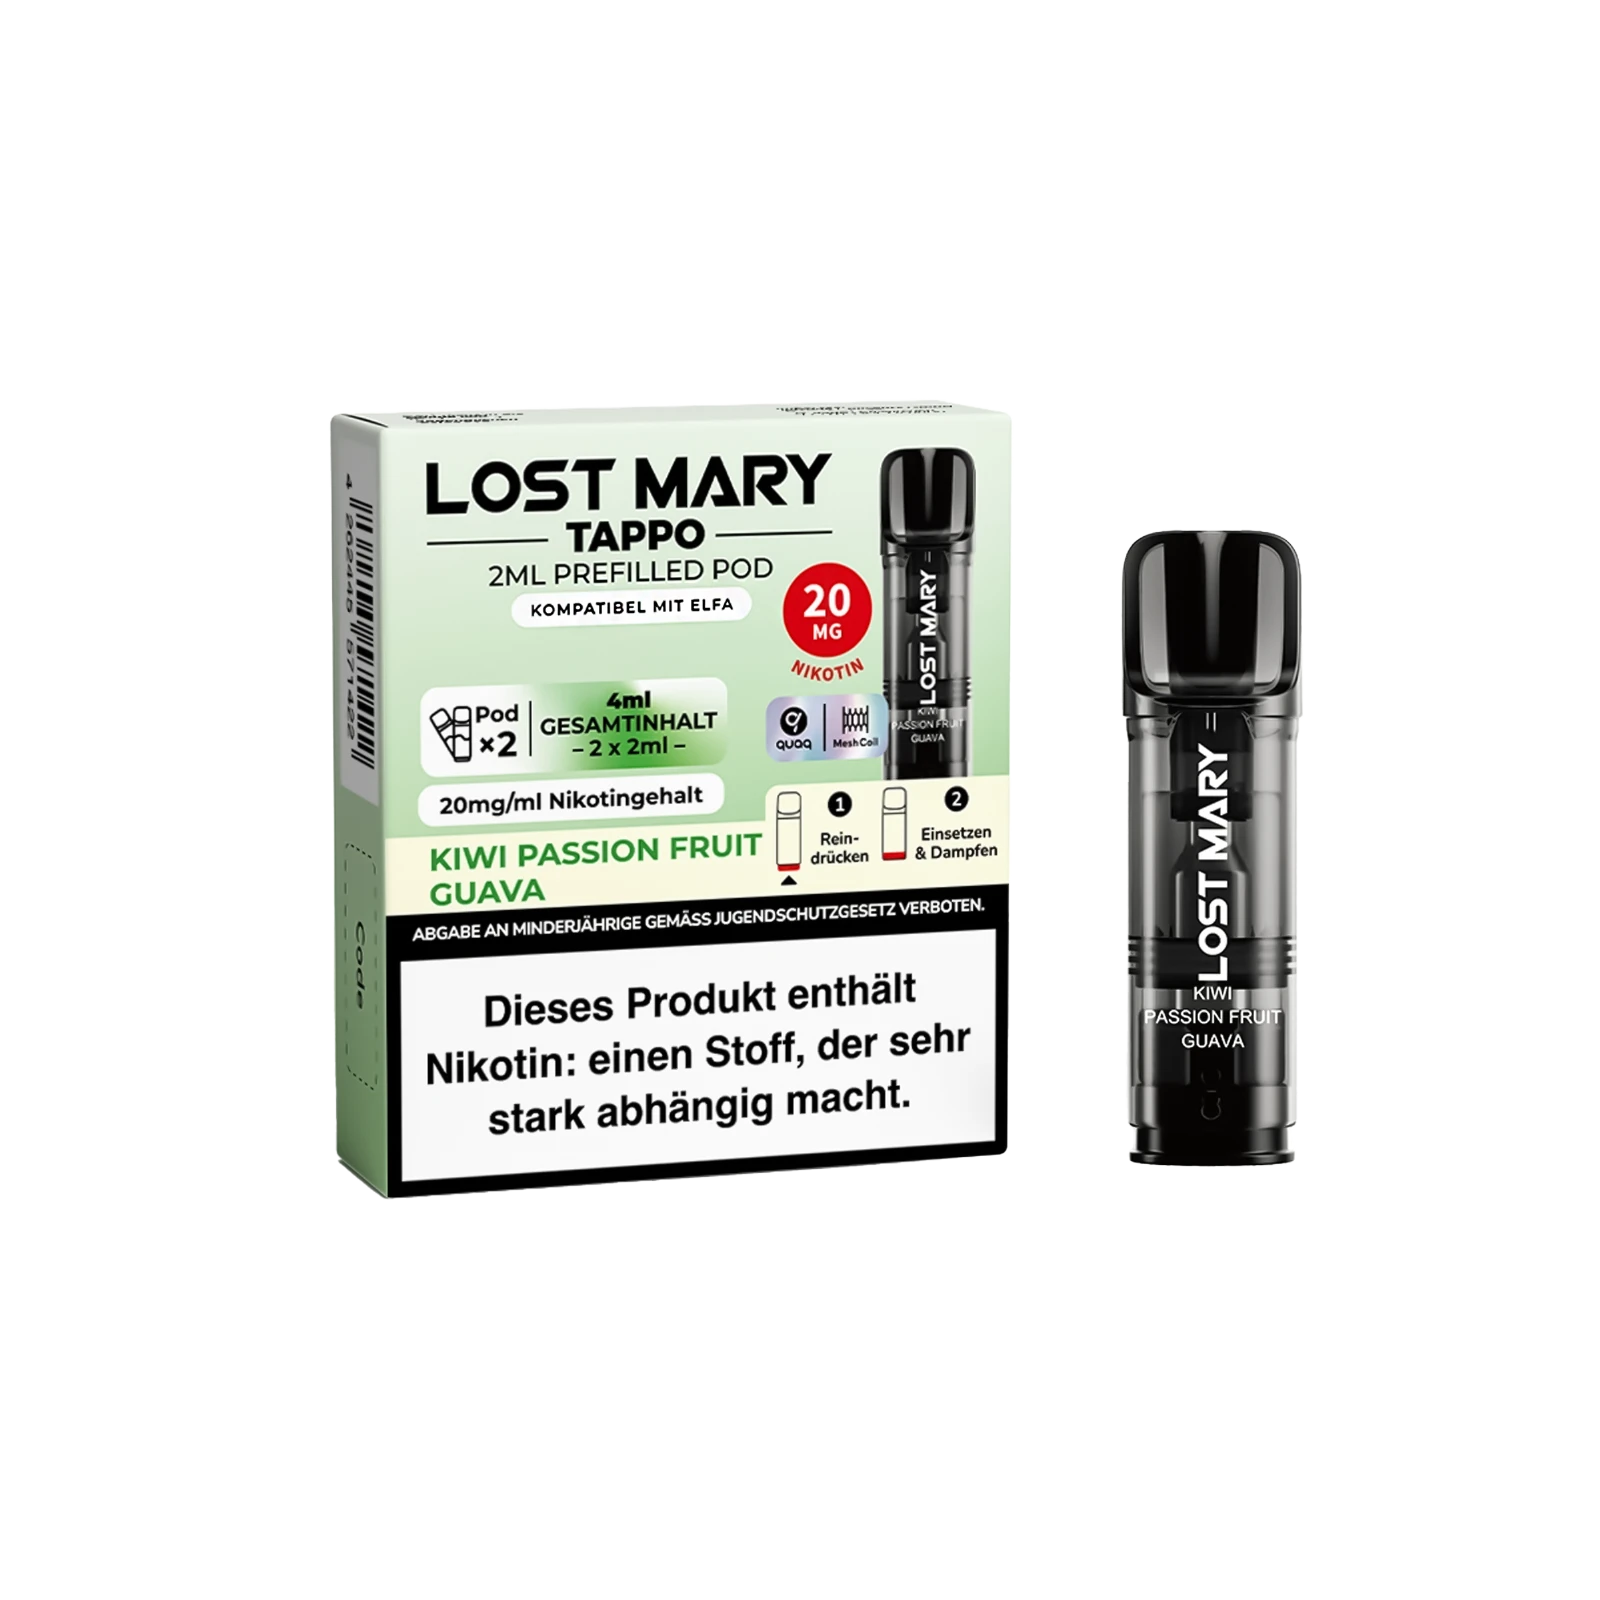 Lost Mary Tappo Kiwi Passionfruit Guava: Umweltfreundliches Pod-System mit Prefilled Pods 2